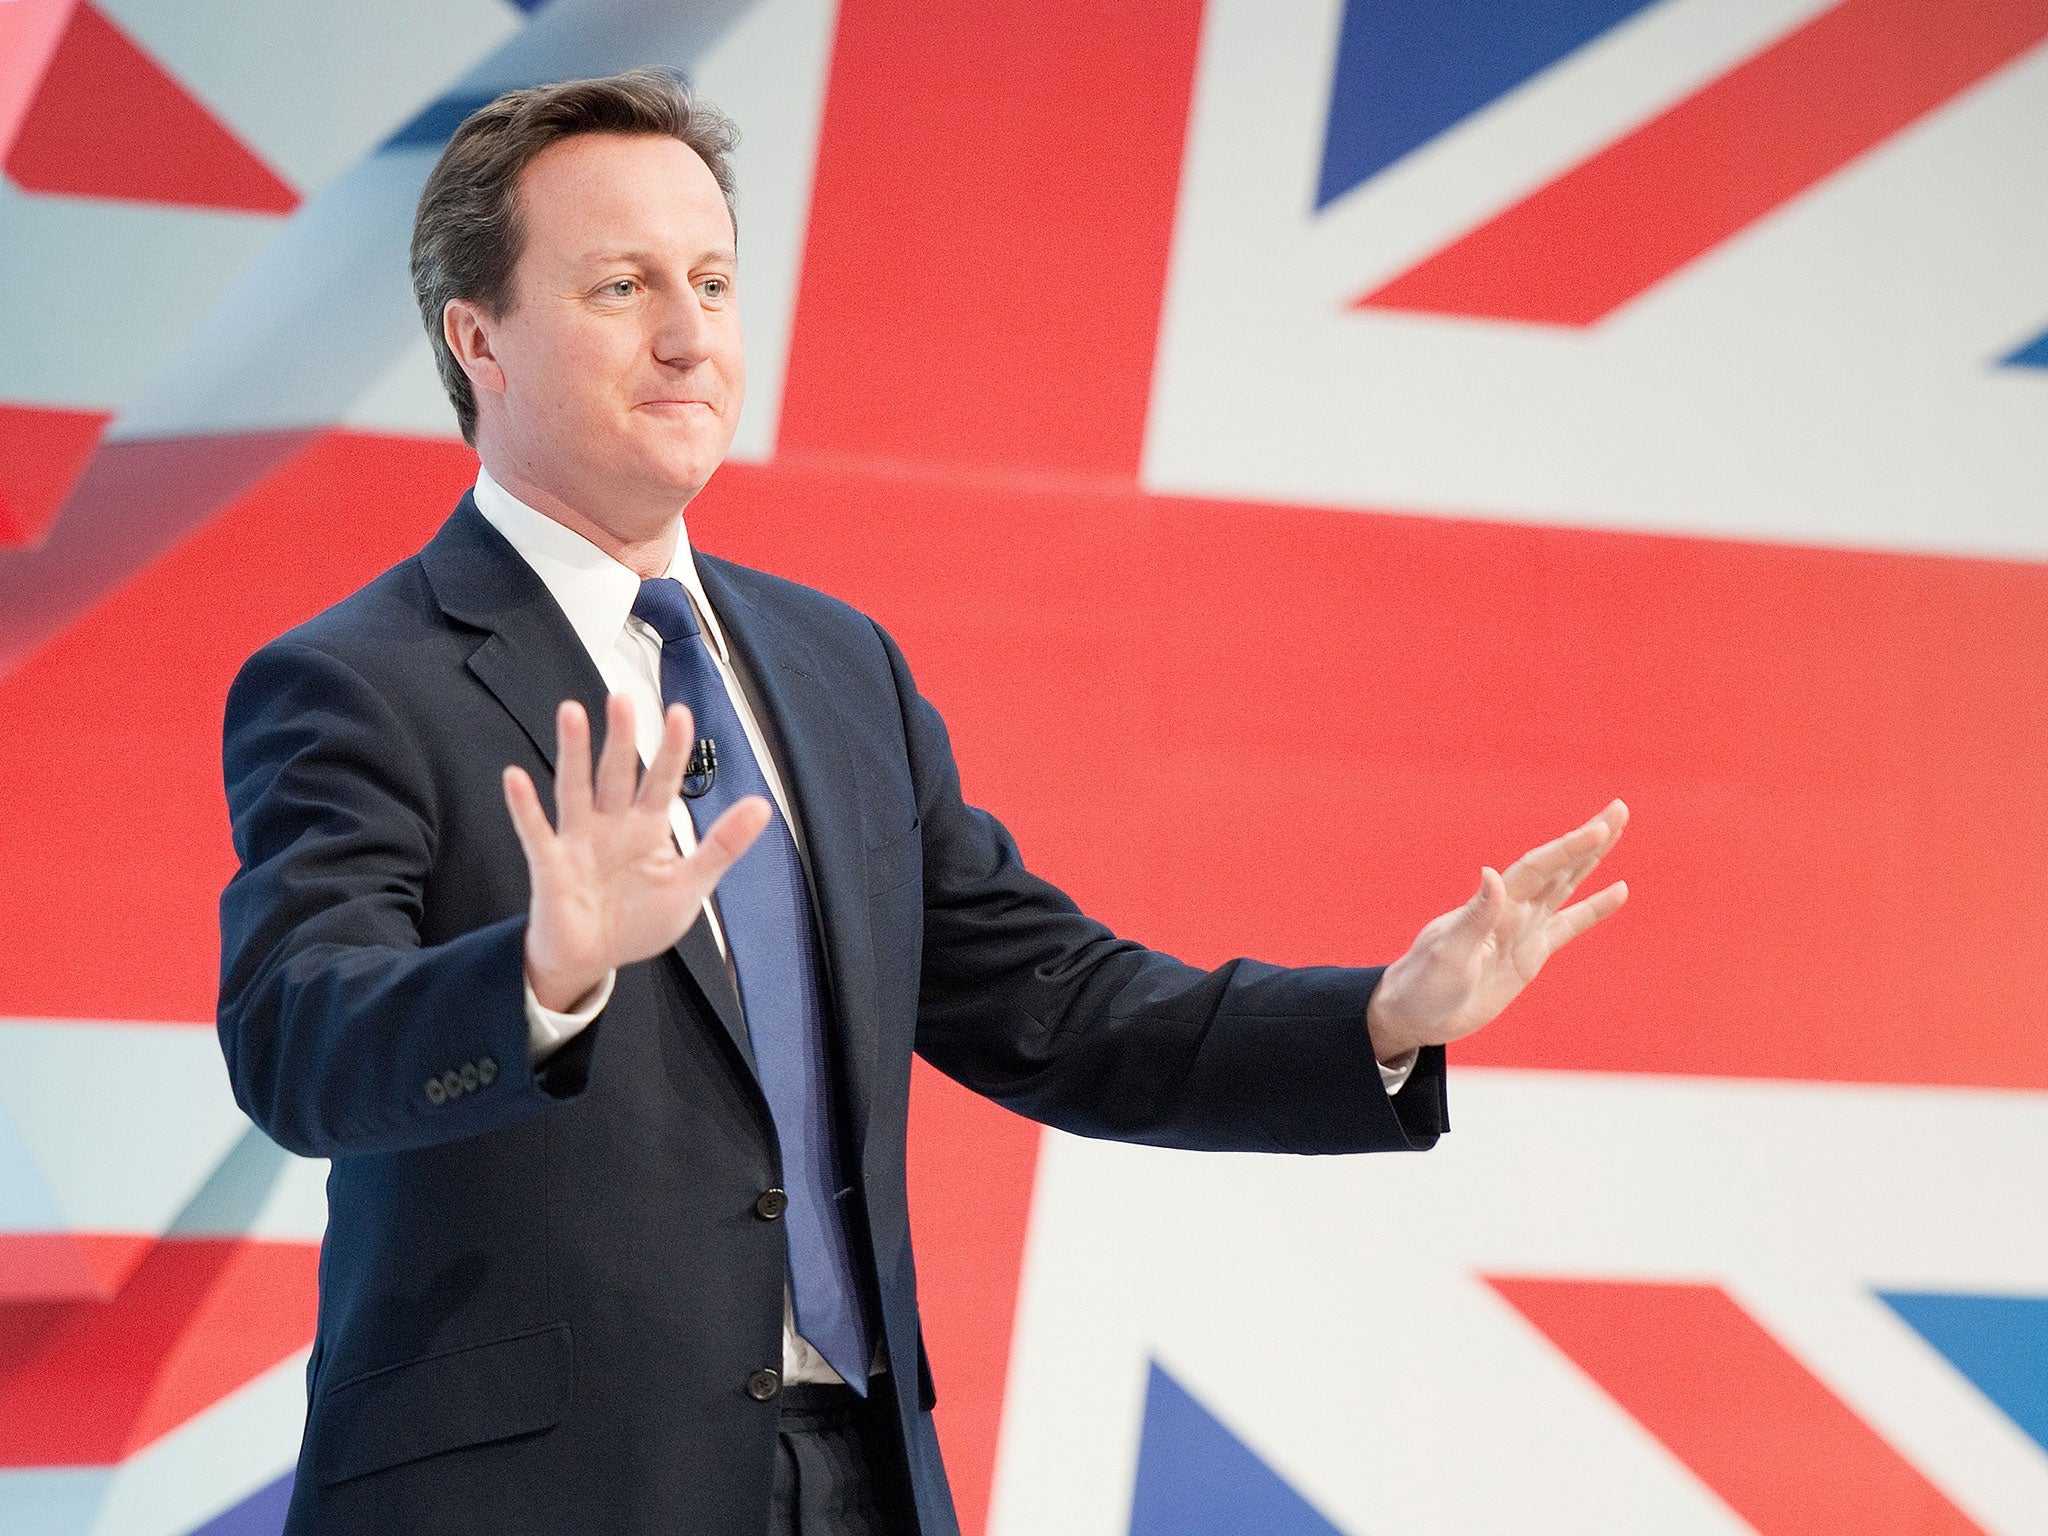 Tough talking: David Cameron is expected to give his speech tomorrow